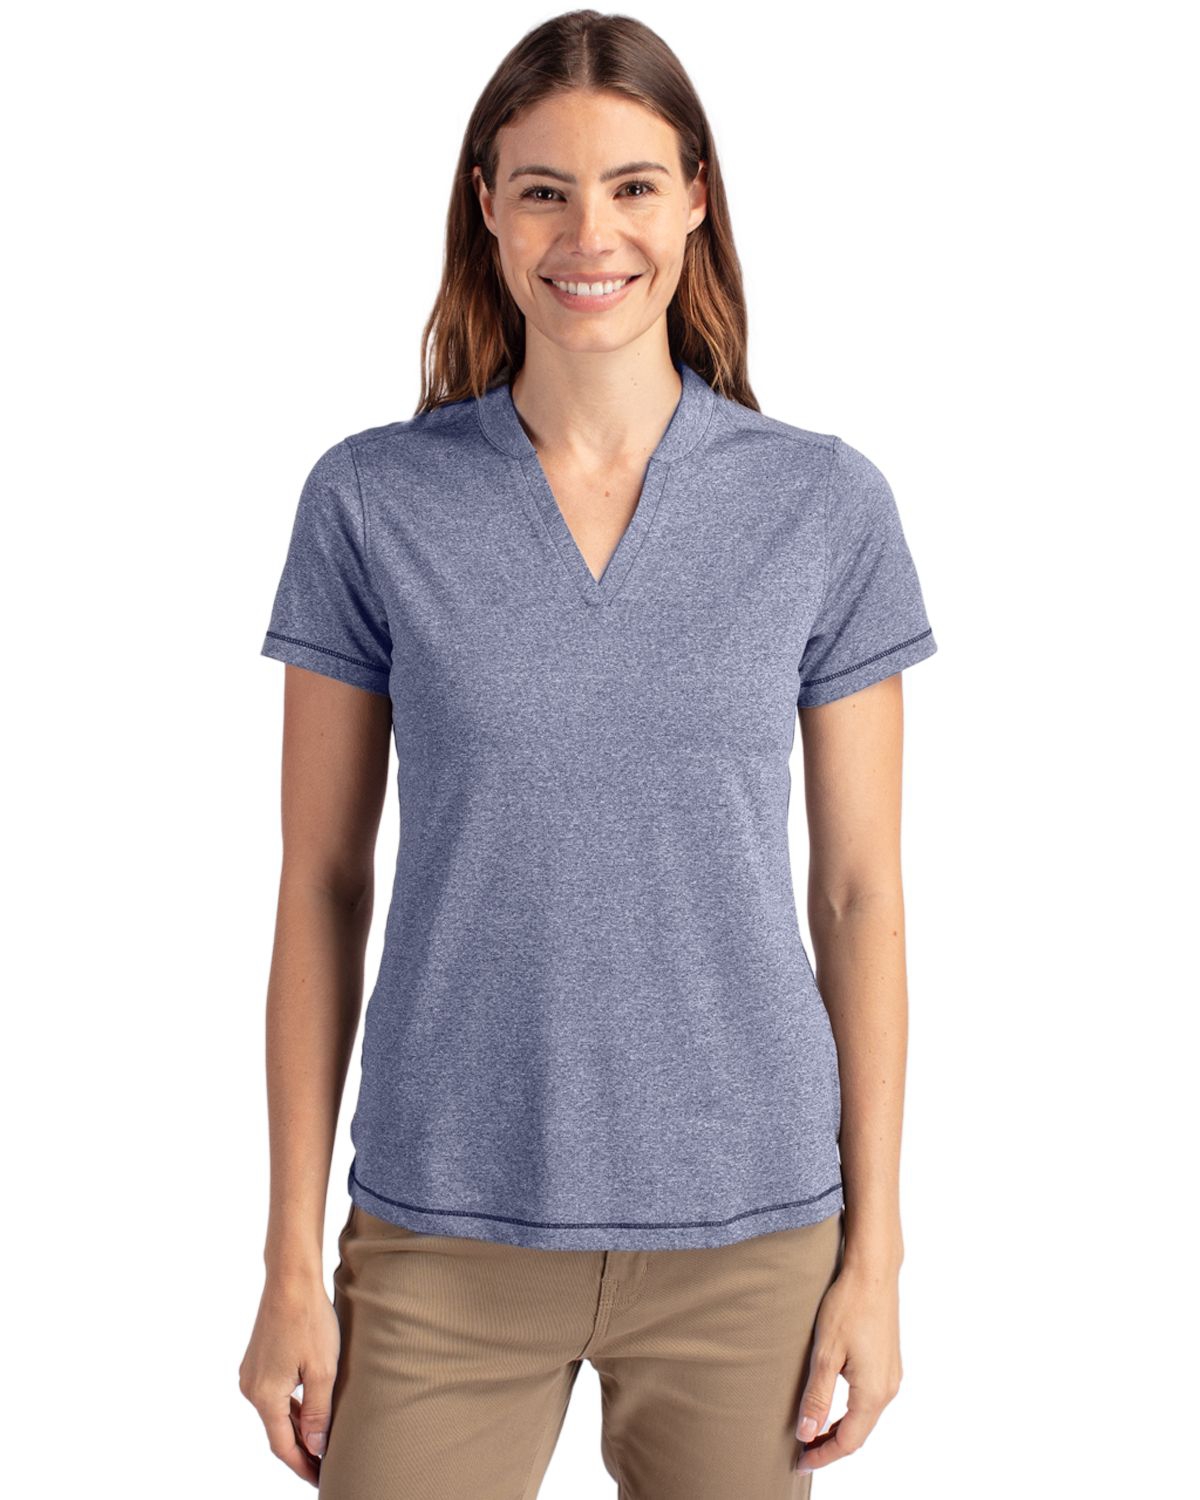 Cutter Buck Forge Heathered Stretch Women's Blade Top - White